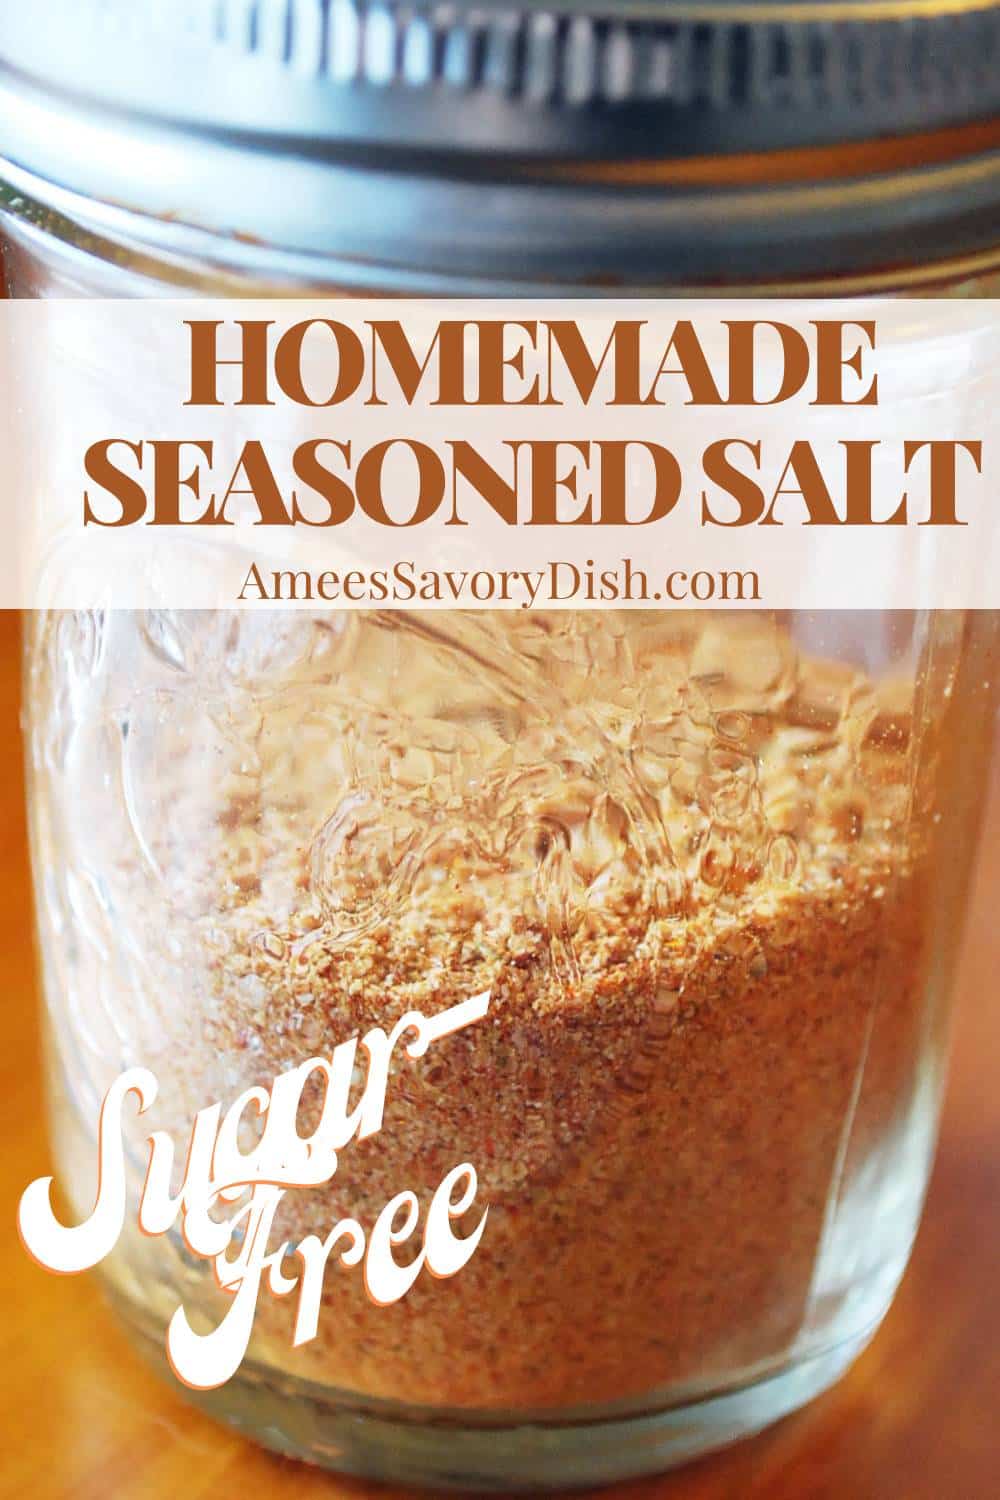 This homemade sugar-free seasoned salt is a tasty all-purpose blend made with herbs and spices that you probably already have on hand.    via @Ameessavorydish